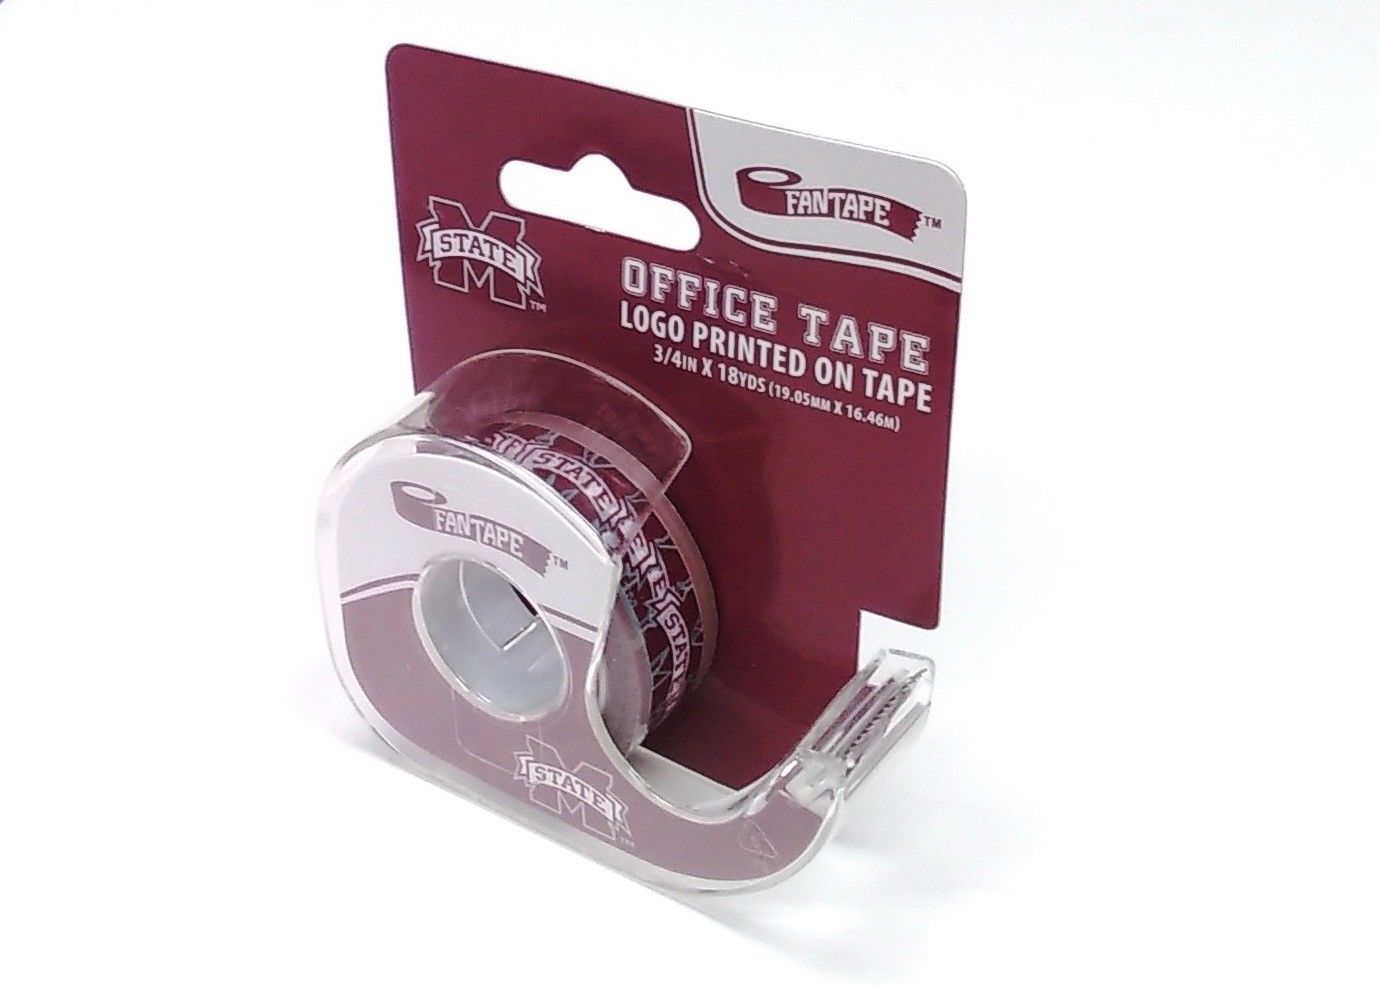 Officially LICENSED Mississippi State University Office Tape